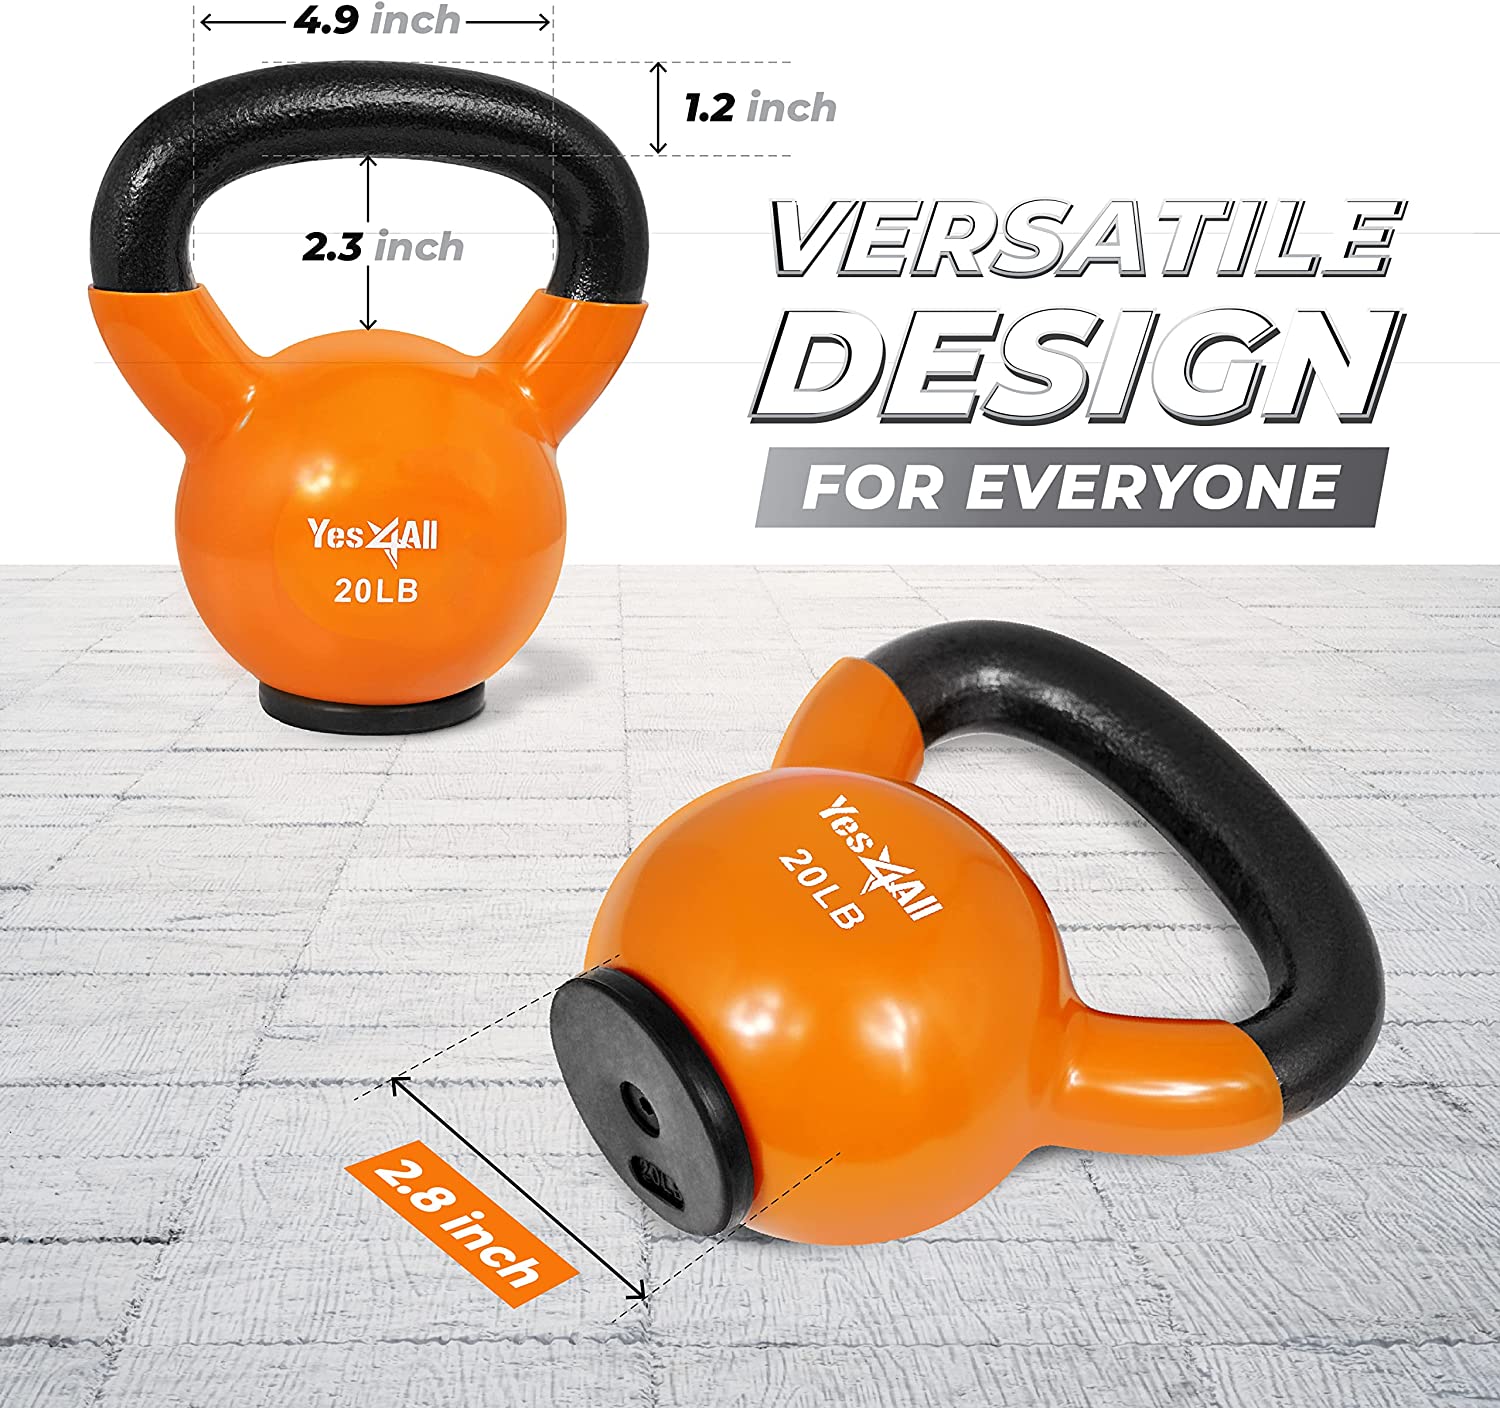 Yes4All 20lb Vinyl Coated / PVC Kettlebell with Rubber Base, Orange, Single - image 4 of 8